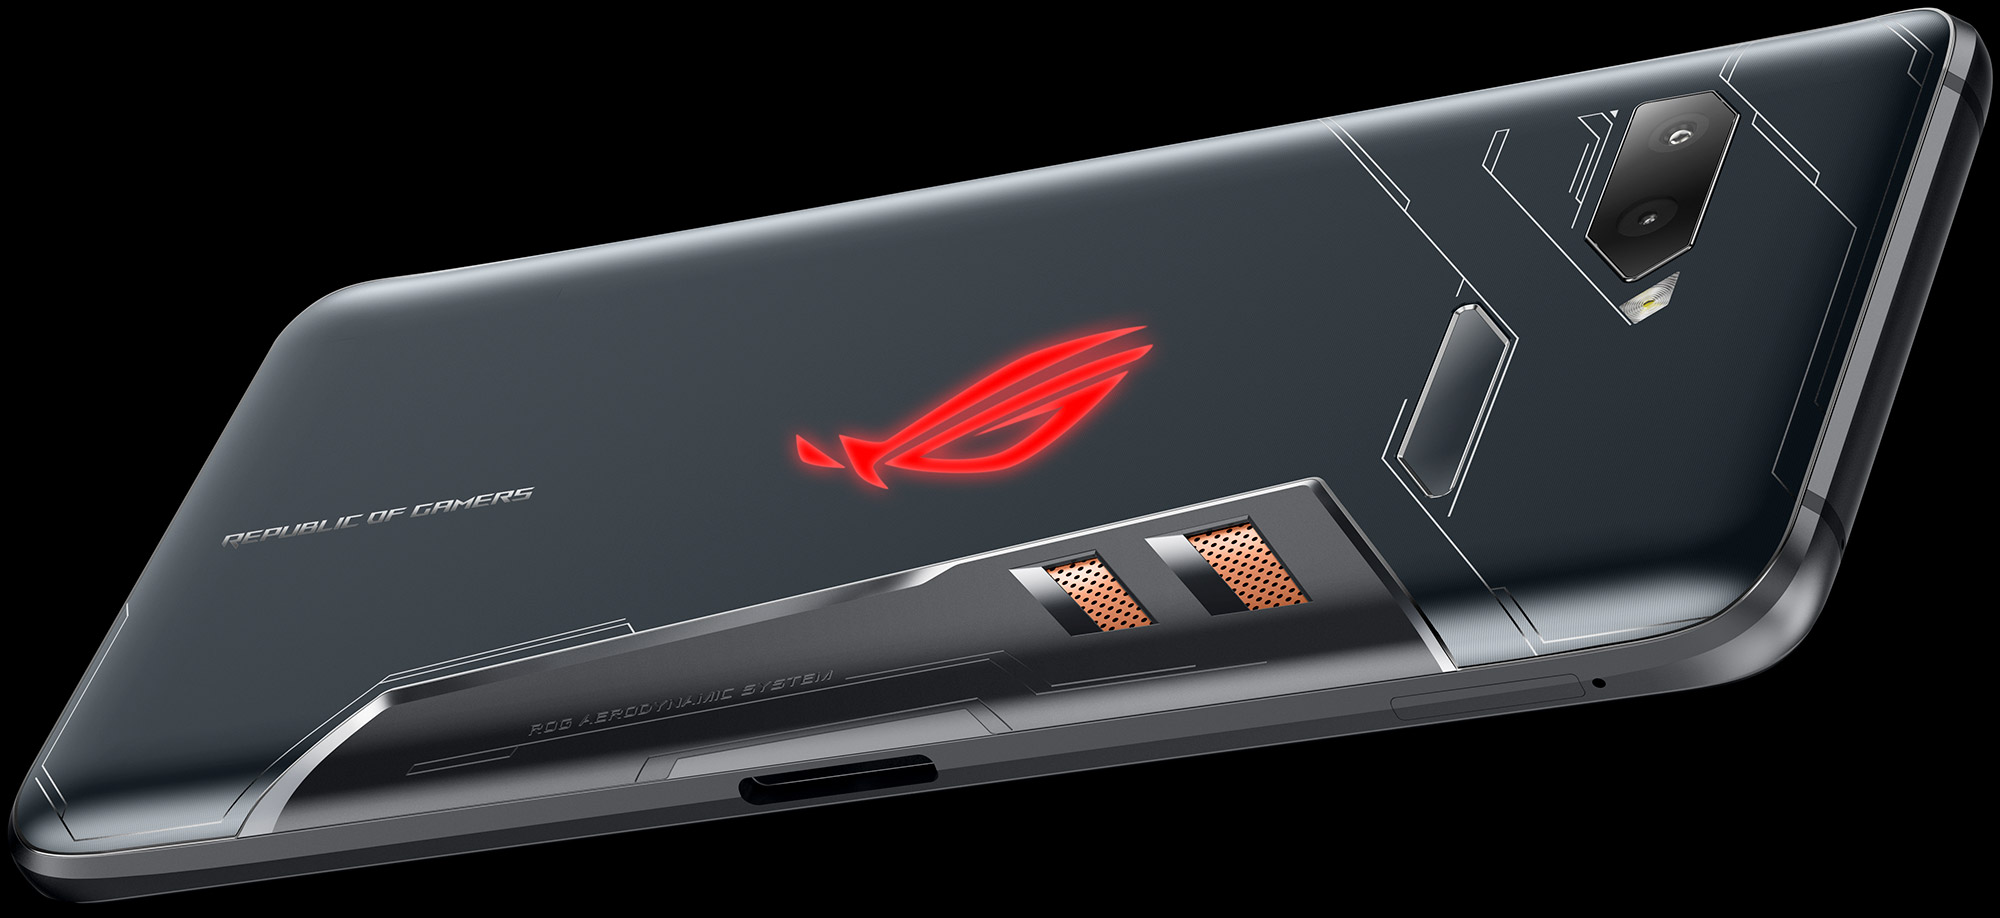 Image result for Preorders for the Asus ROG gaming smartphone go live